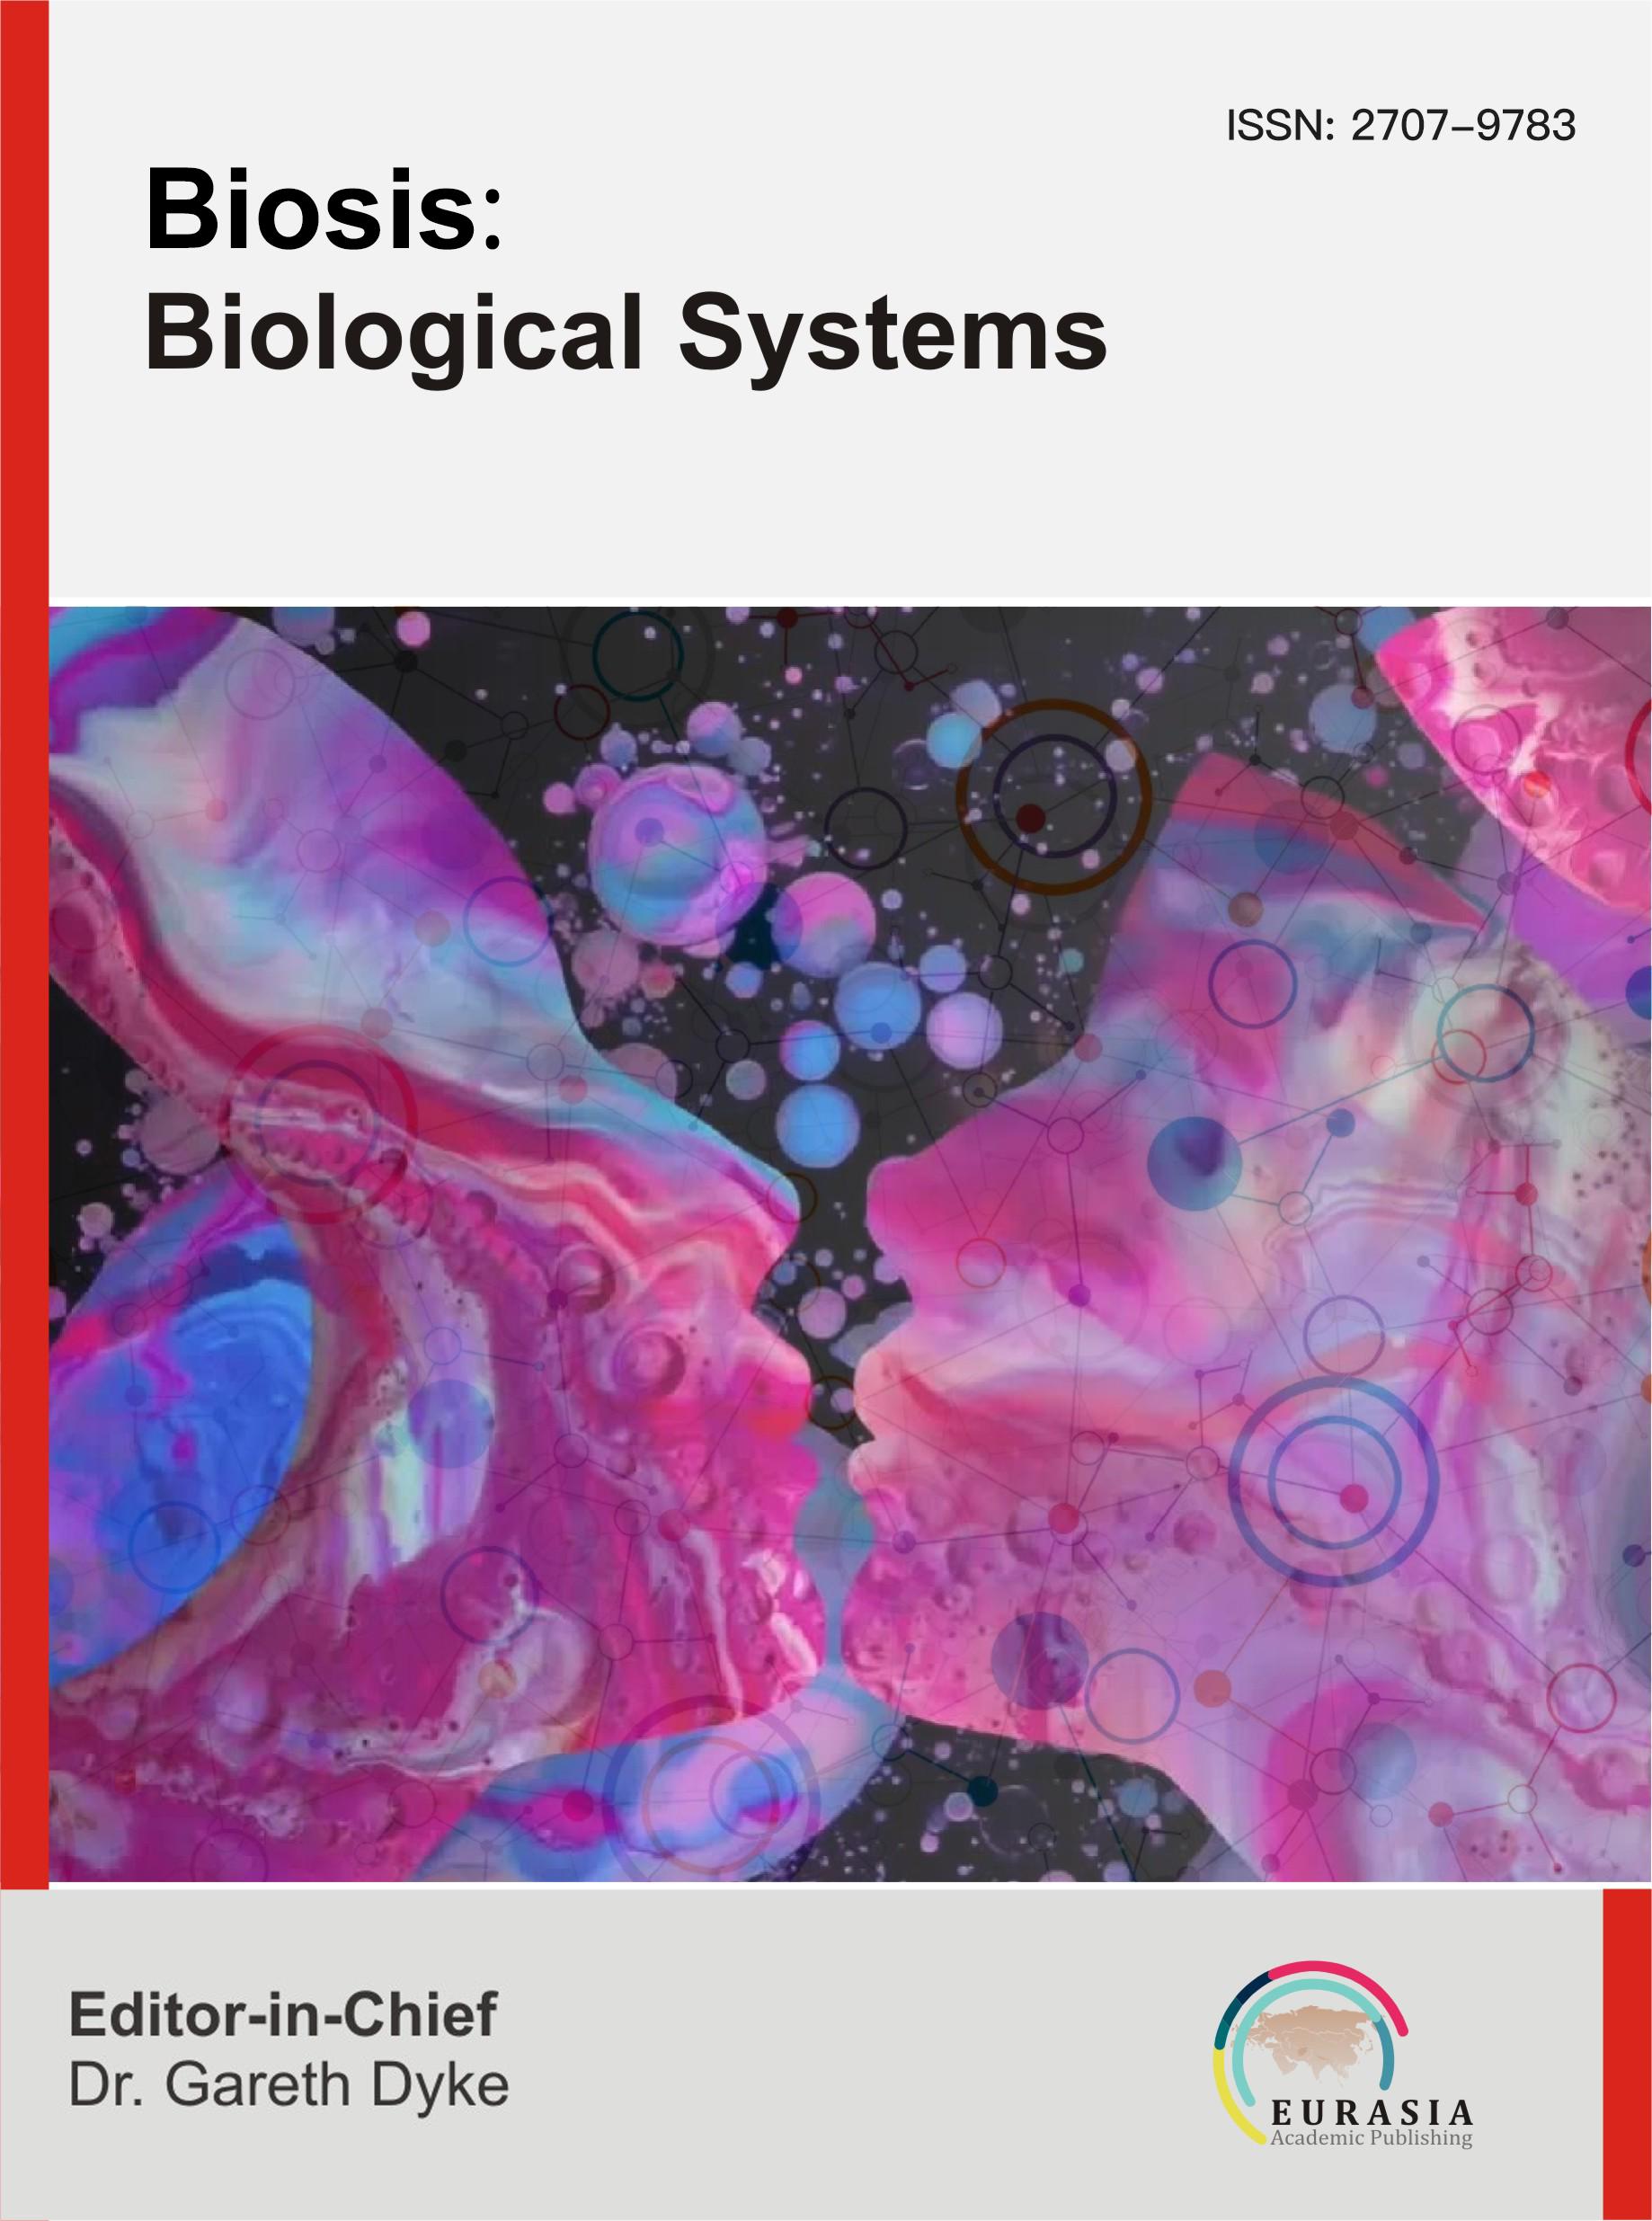 					View Vol. 1 No. 3 (2020): Biosis: Biological Systems
				